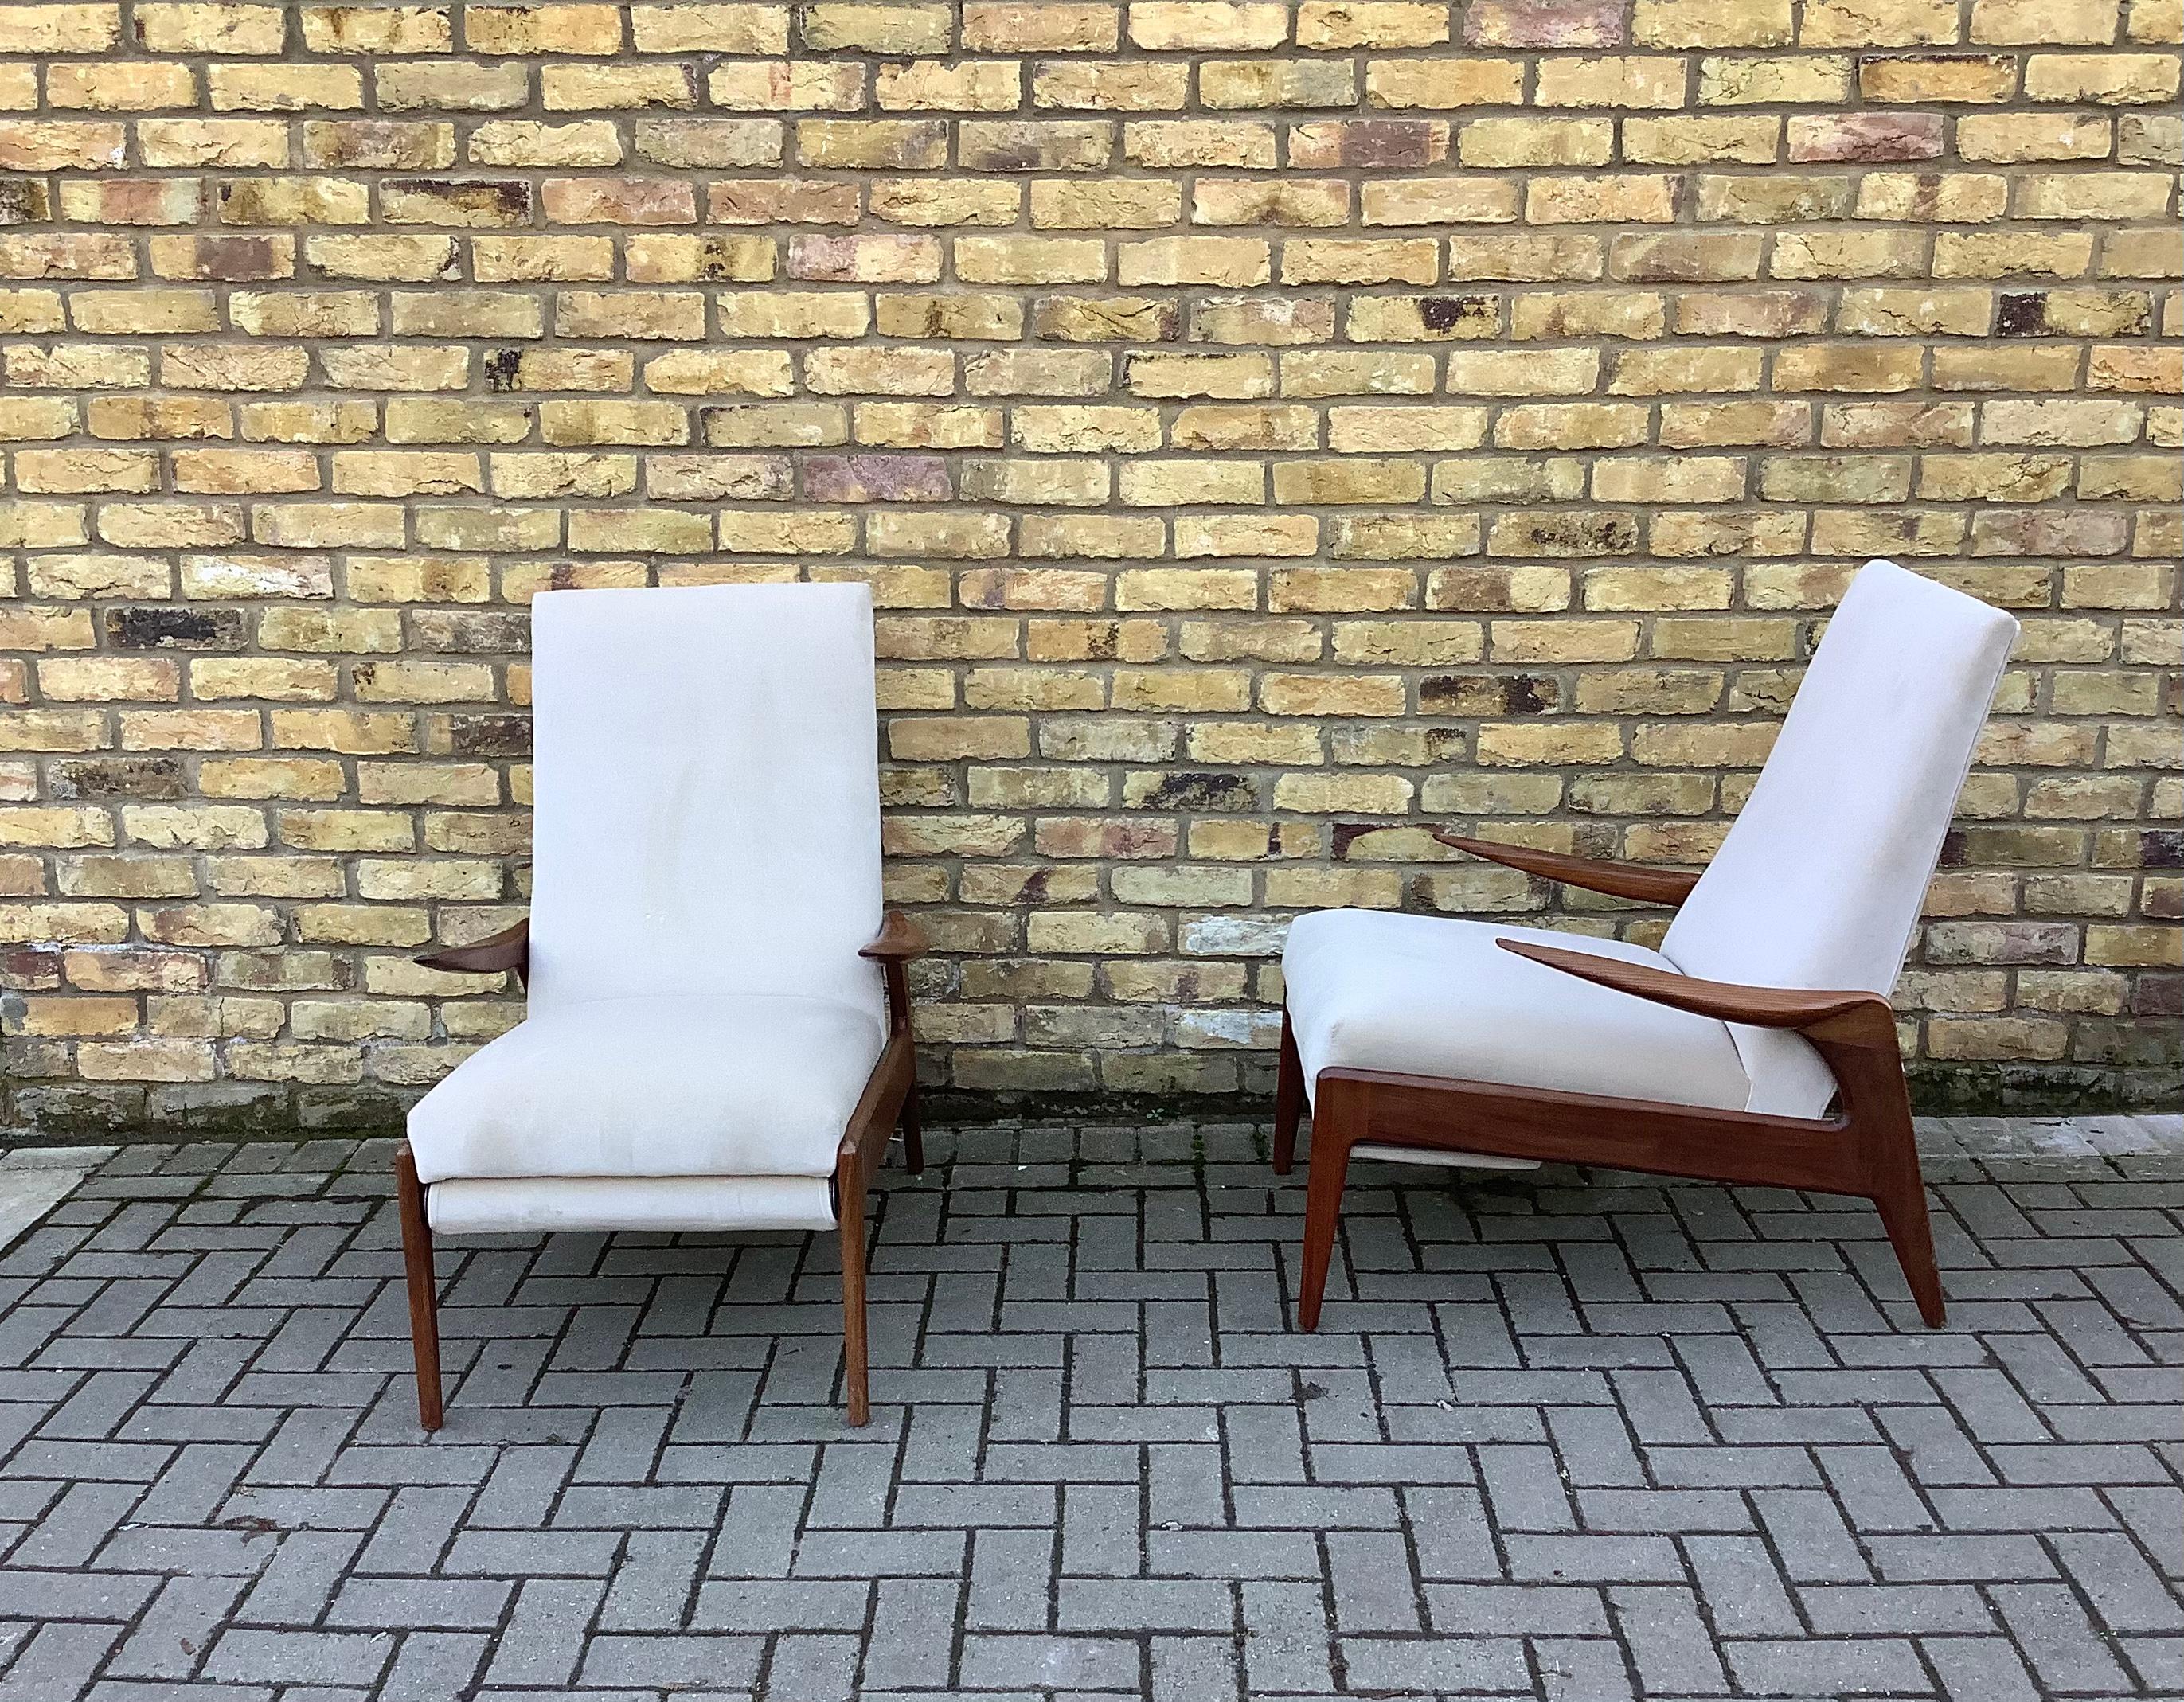 British Grease & Thomas Style 1950s Reclining Armchairs